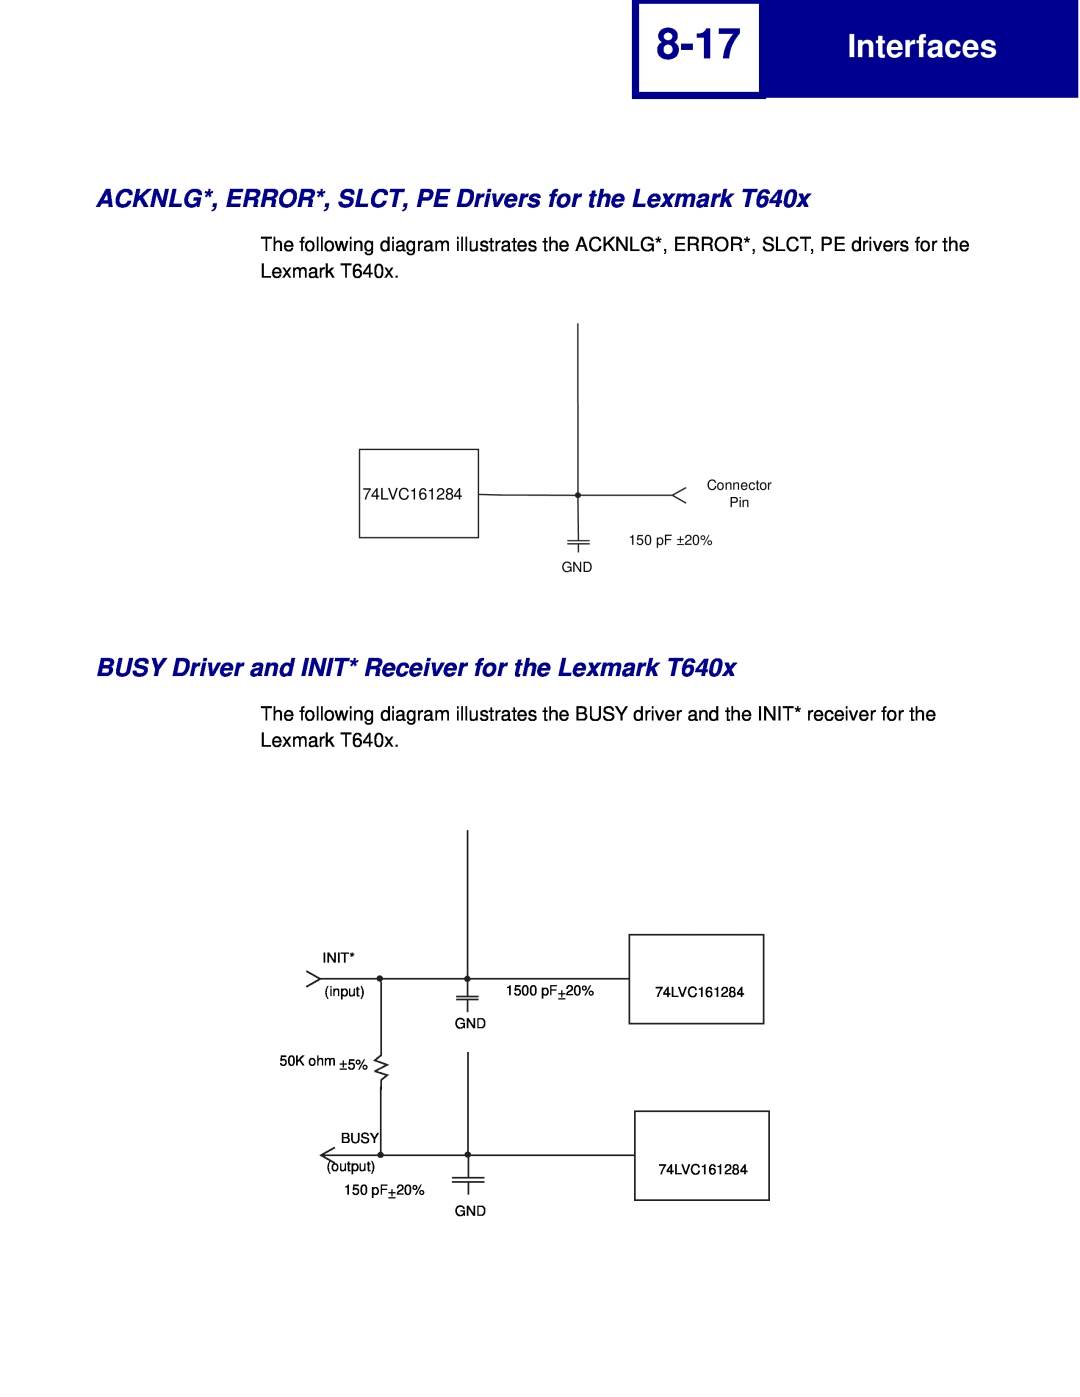 Lexmark C762, C760 manual 8-17, ACKNLG*, ERROR*, SLCT, PE Drivers for the Lexmark T640x, Interfaces, Connector 